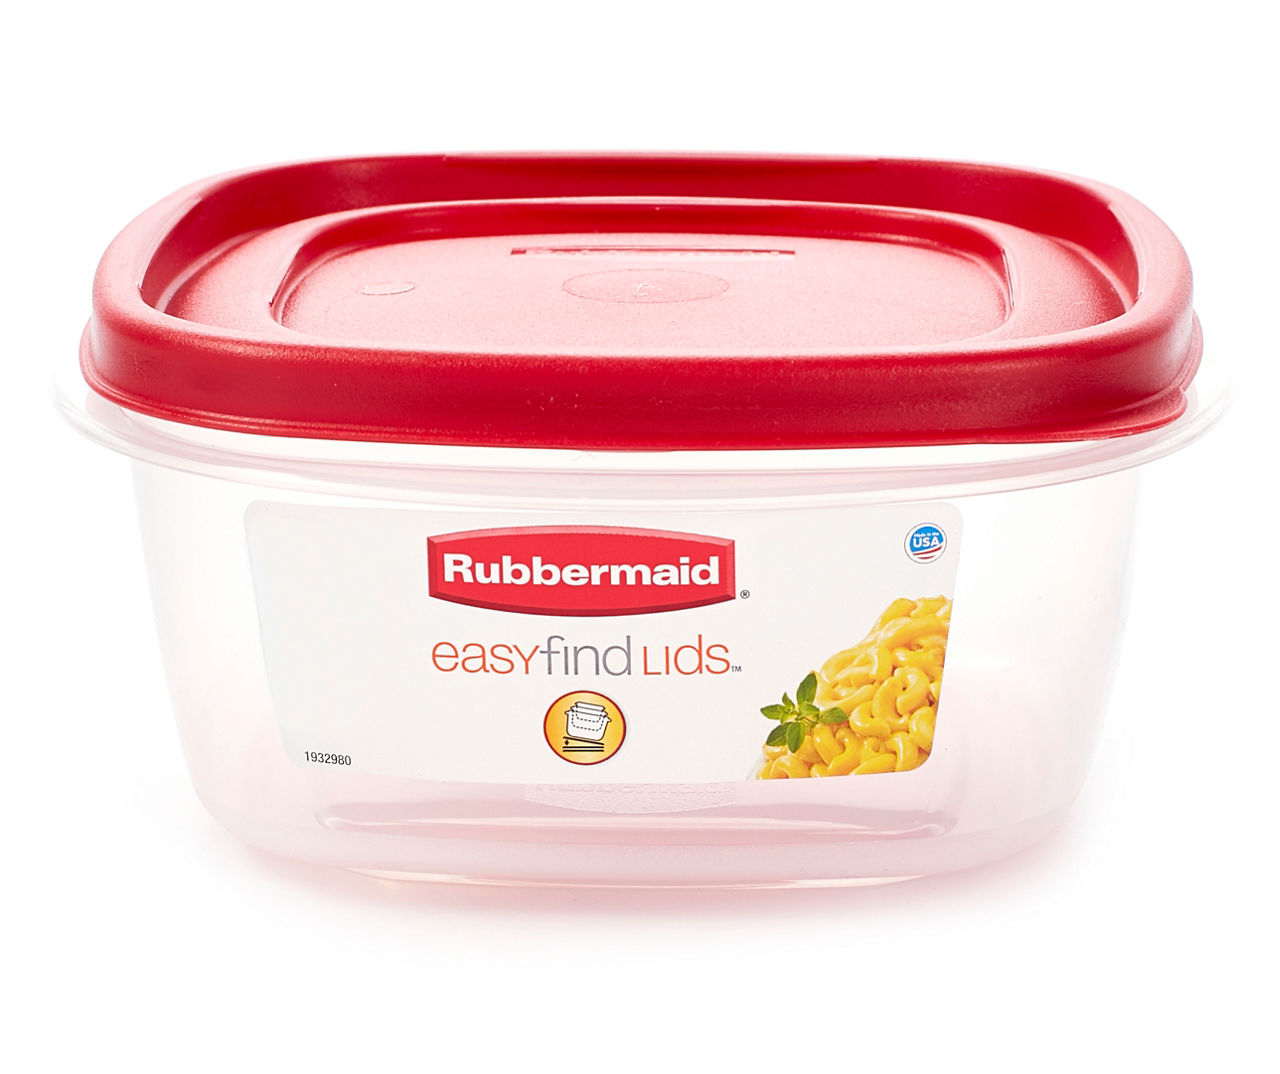 Rubbermaid Premier 5-Cup Square Food Storage Container 